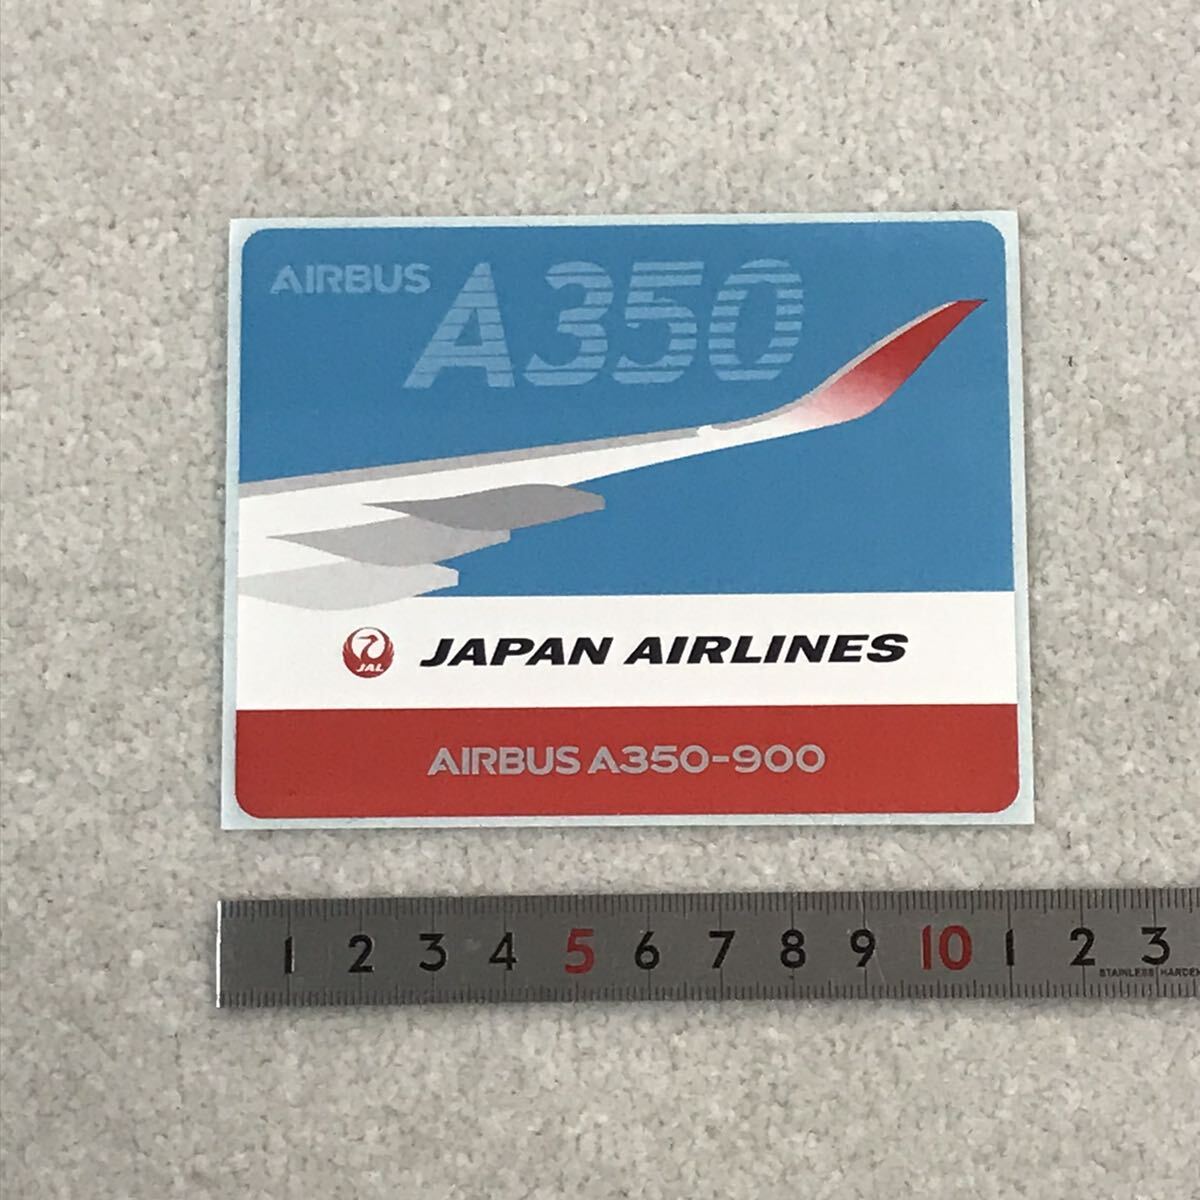 JAL AIRBUS A350 ステッカー  日本航空 エアバス シール 非売品 就航記念 ①の画像2